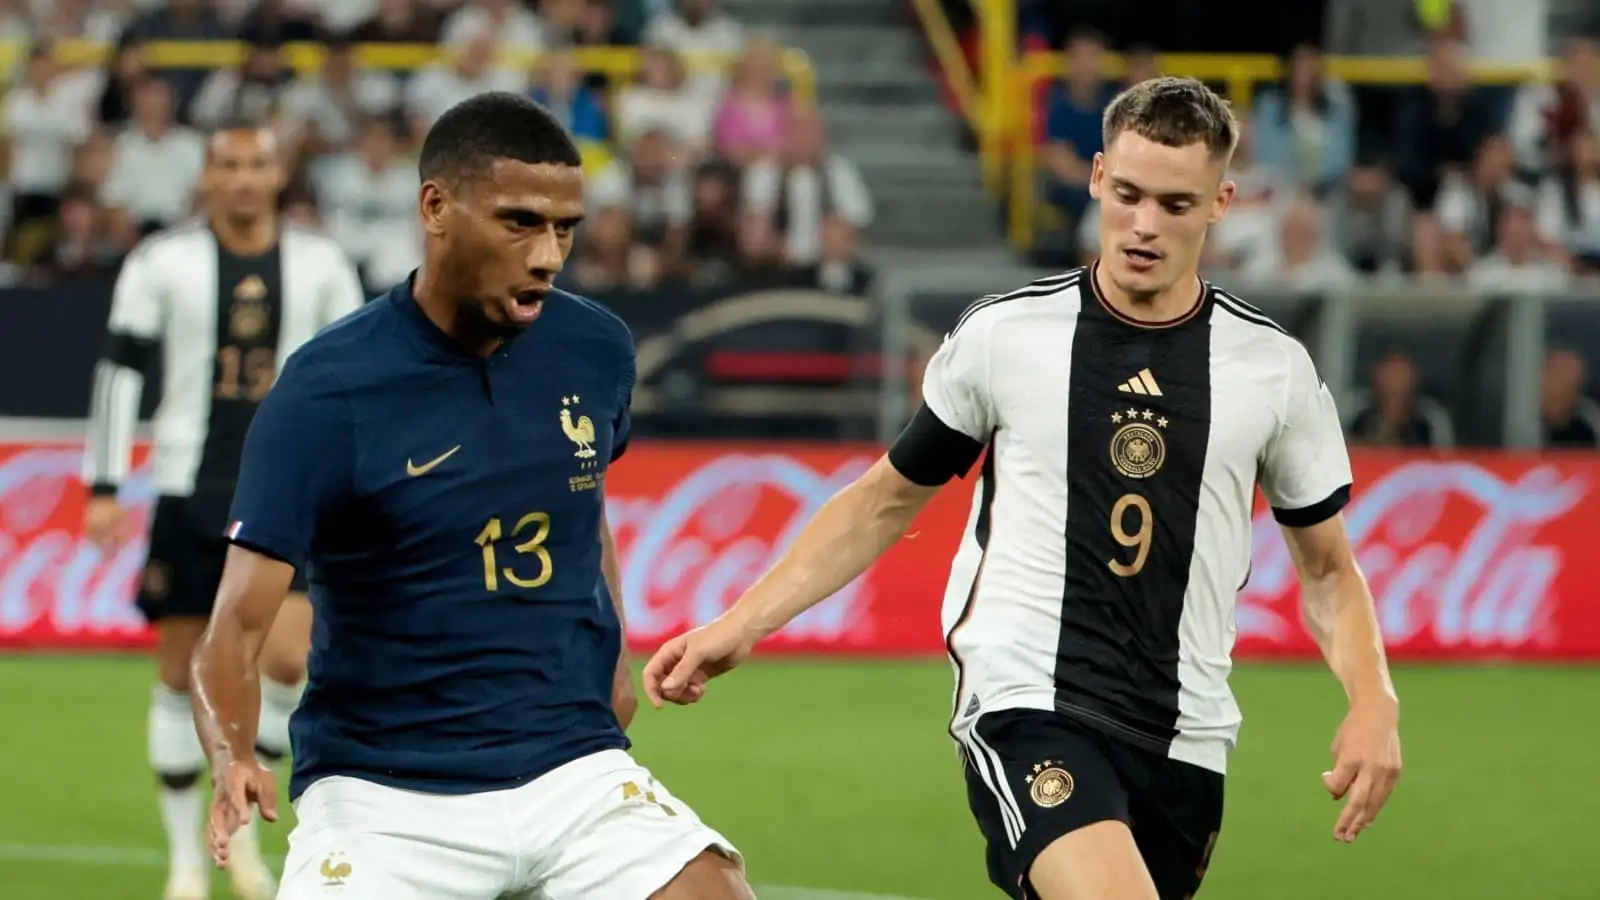 Jean-Clair Todibo and Florian Wirtz, France vs Germany